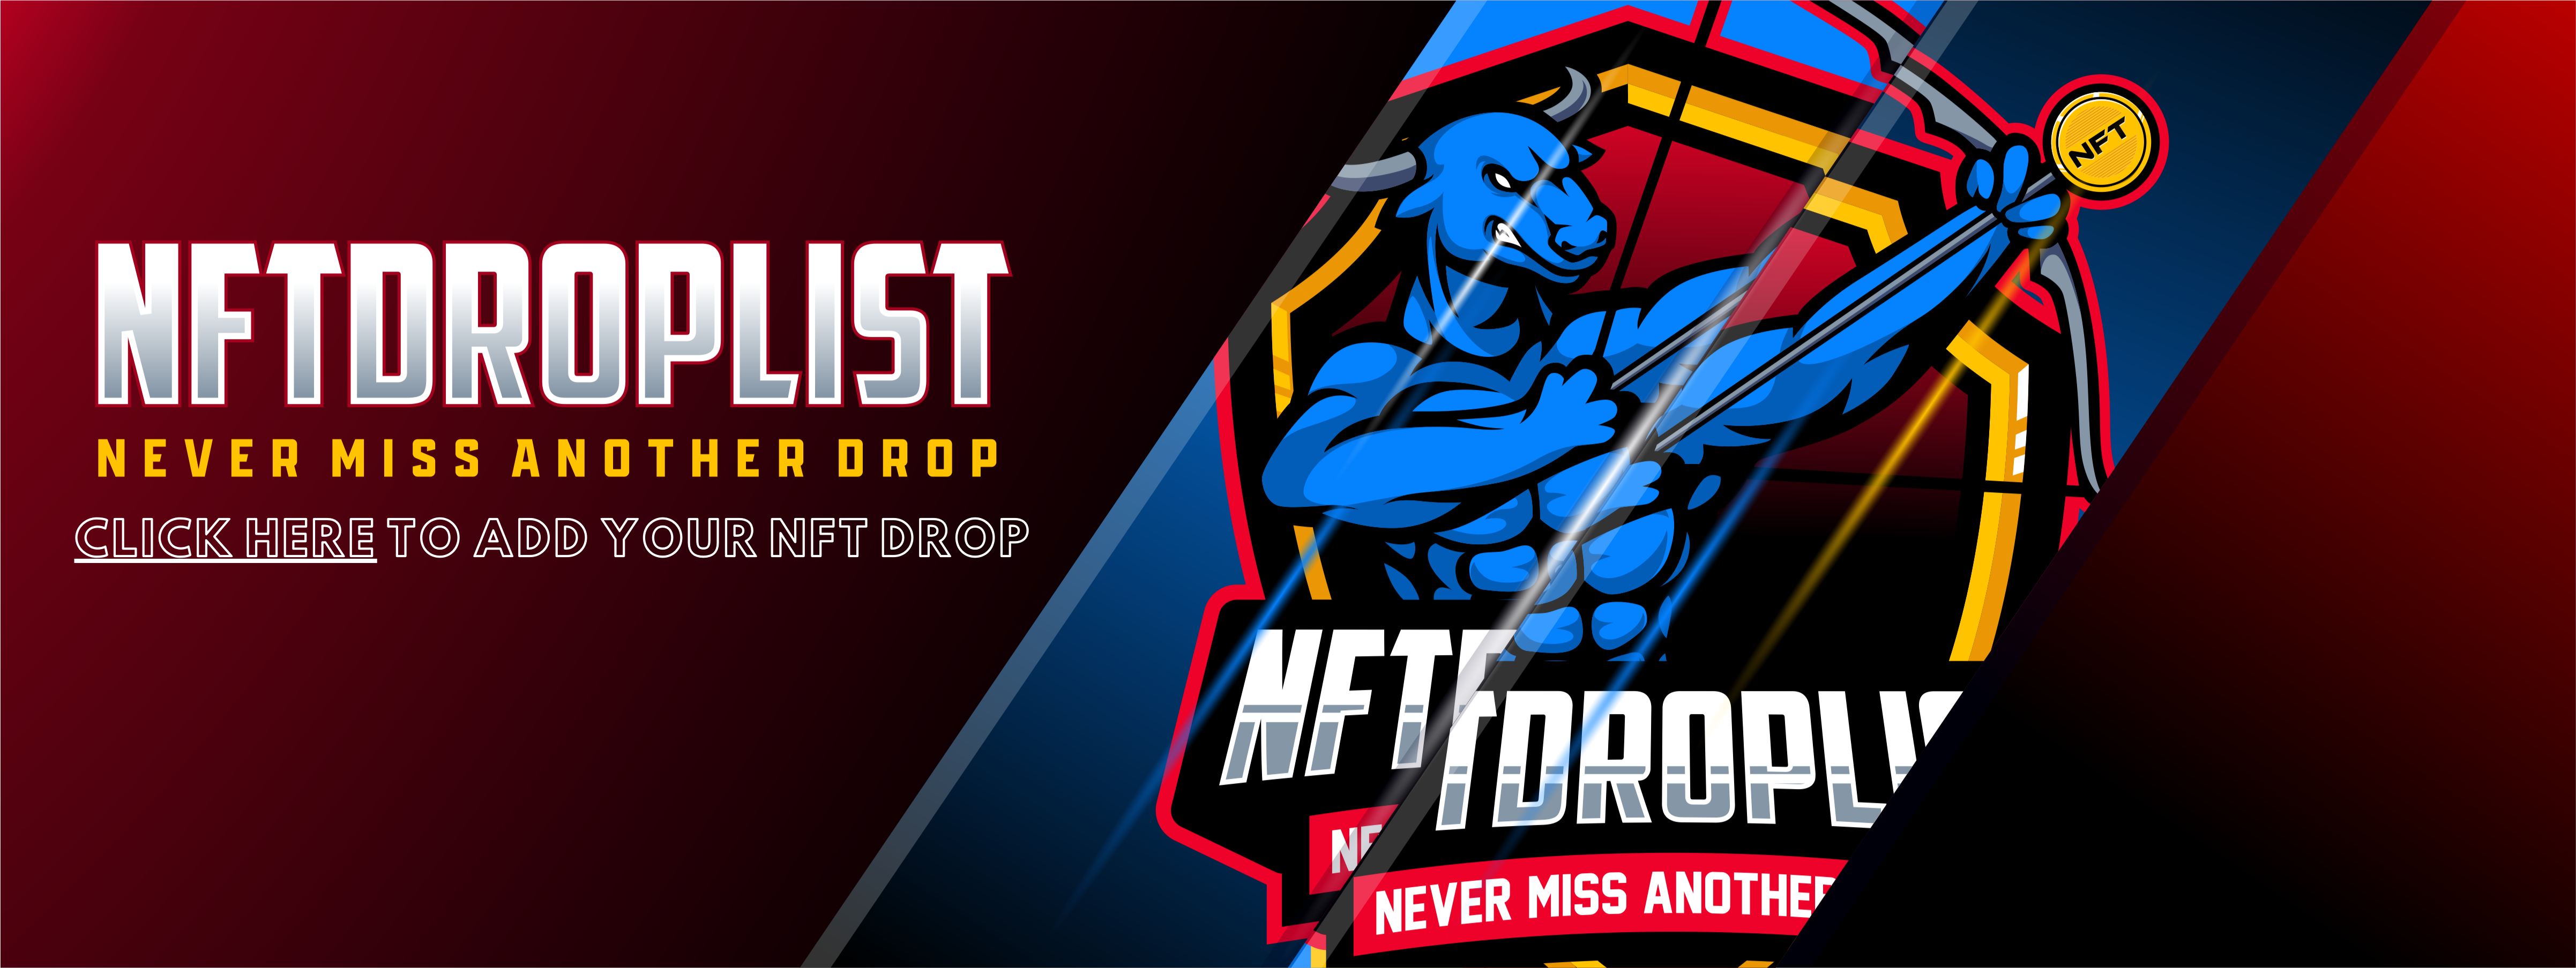 add your nft drop click here